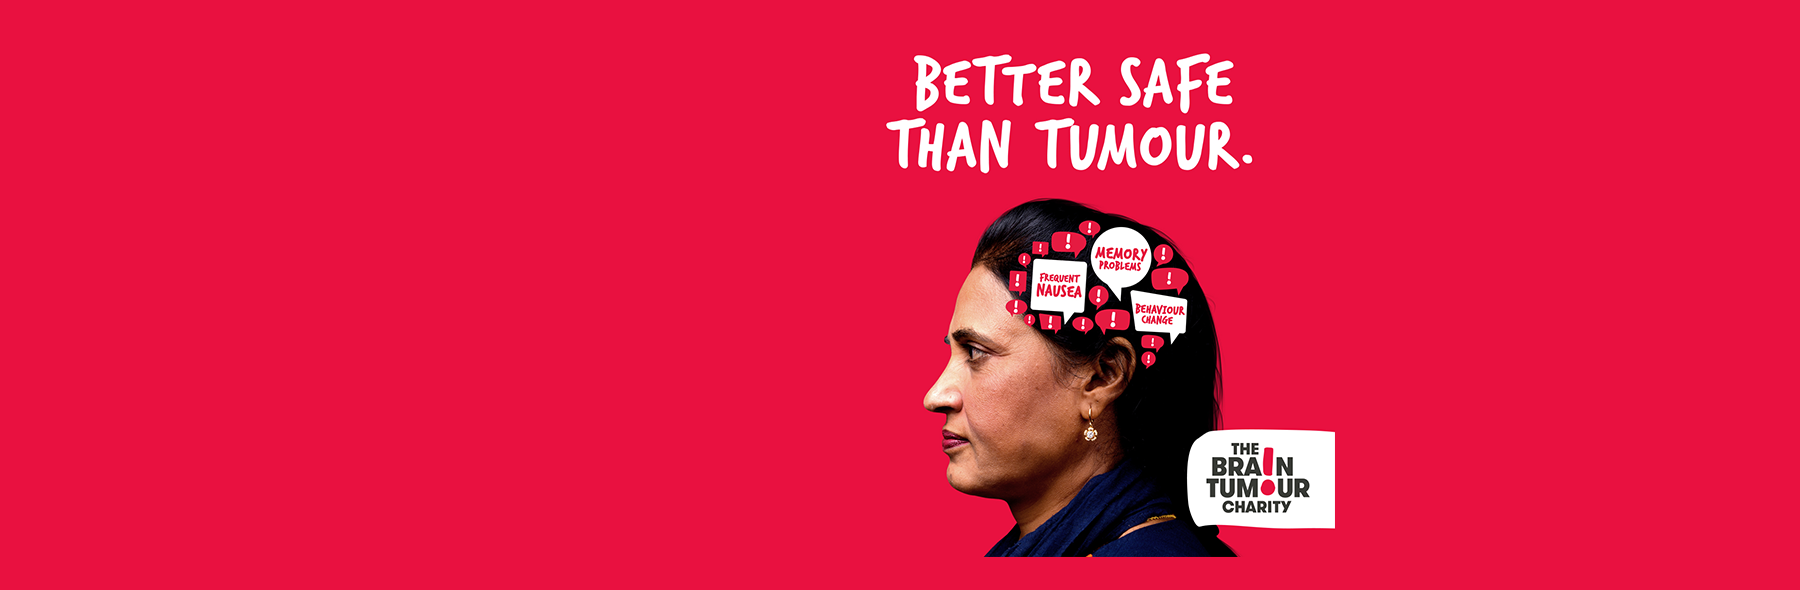 Nearly 72% of people in the UK unable to name a single symptom of a brain tumour